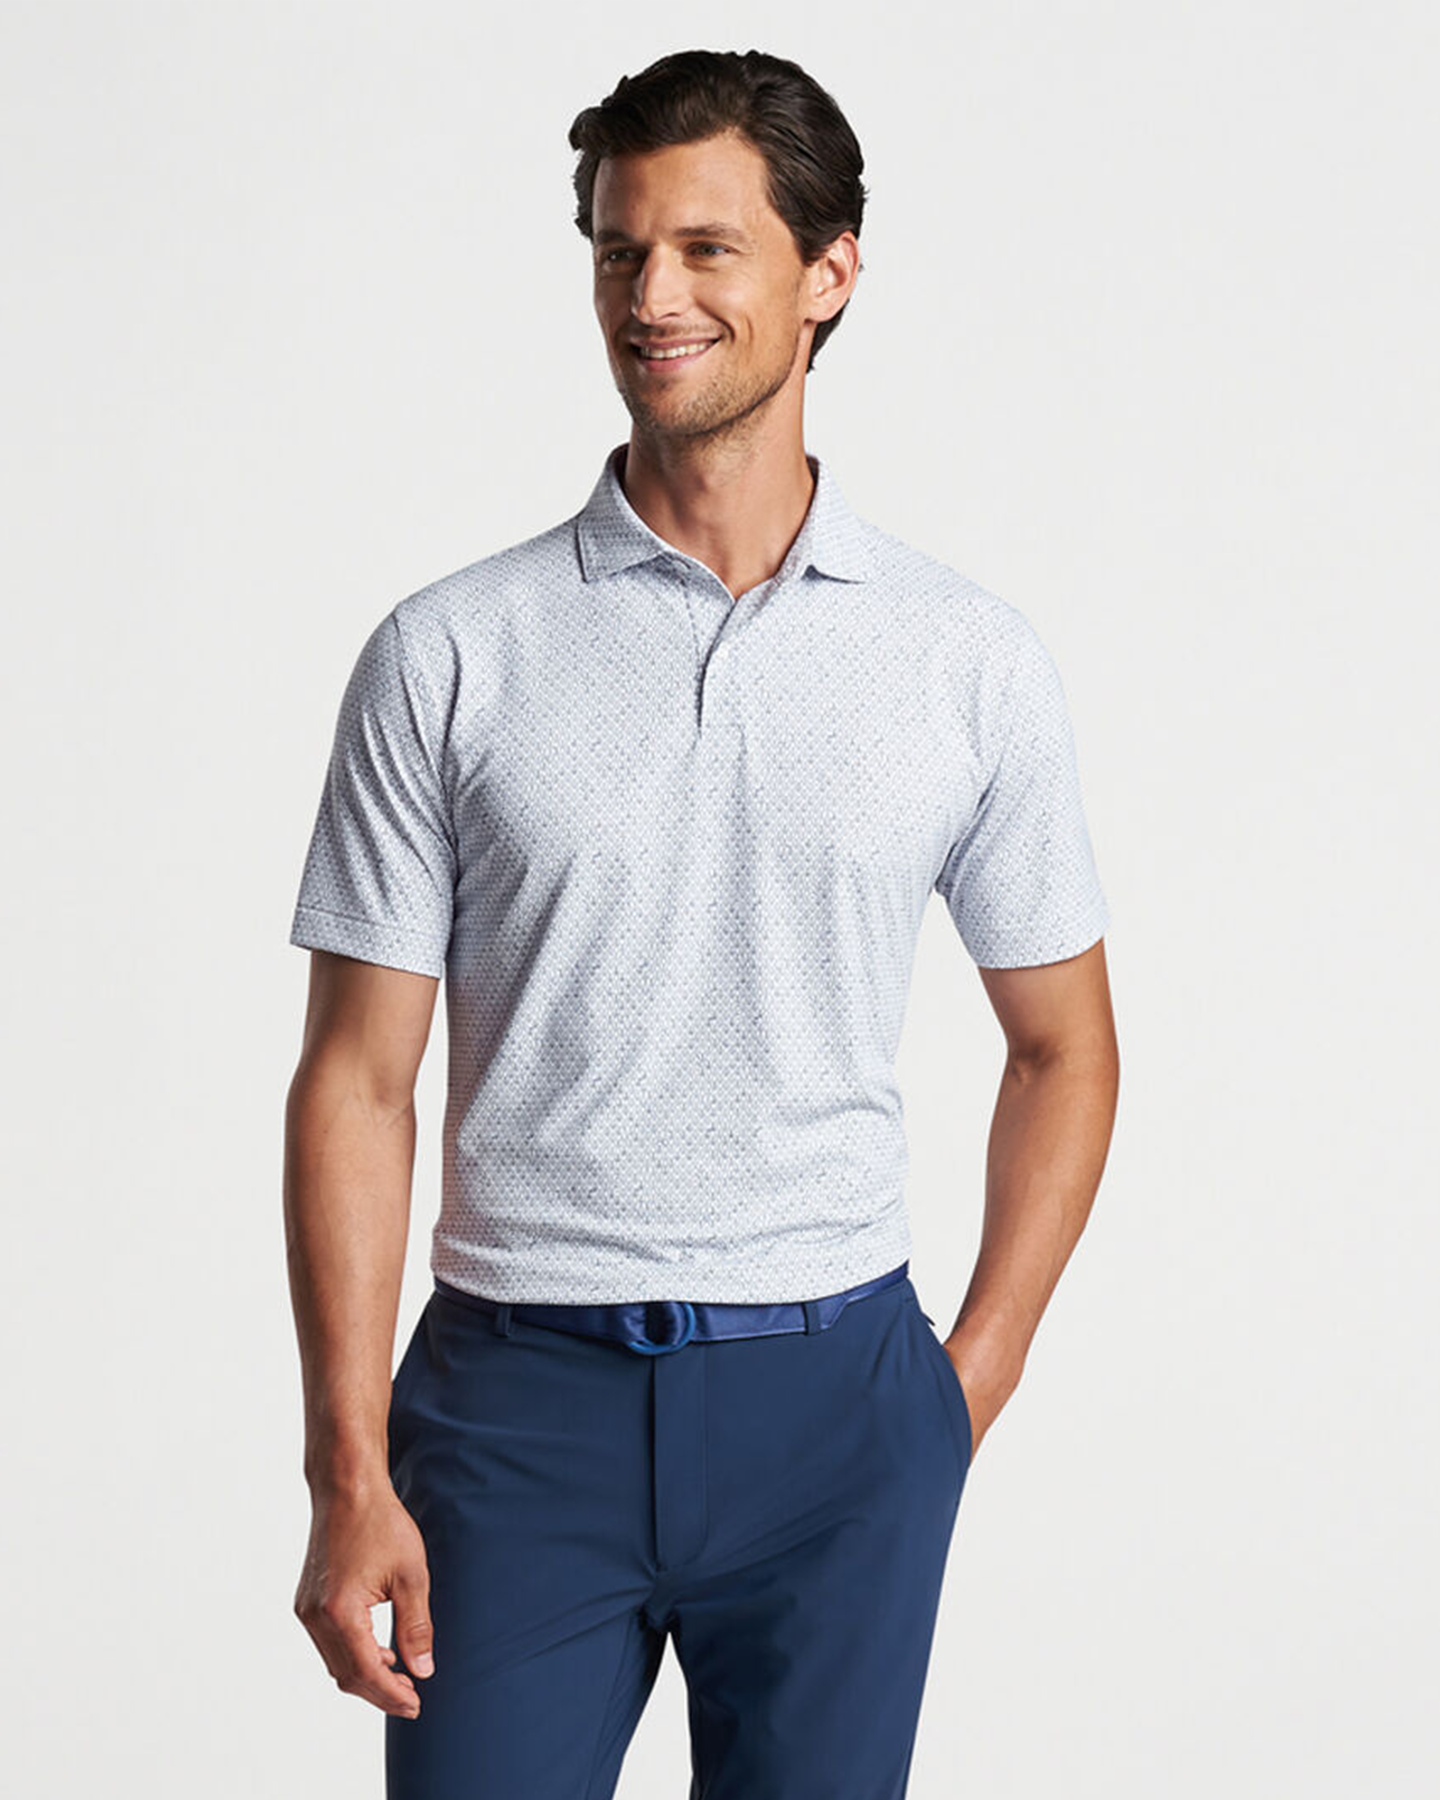 STACCATO PERFORMANCE JERSEY POLO - WHITE